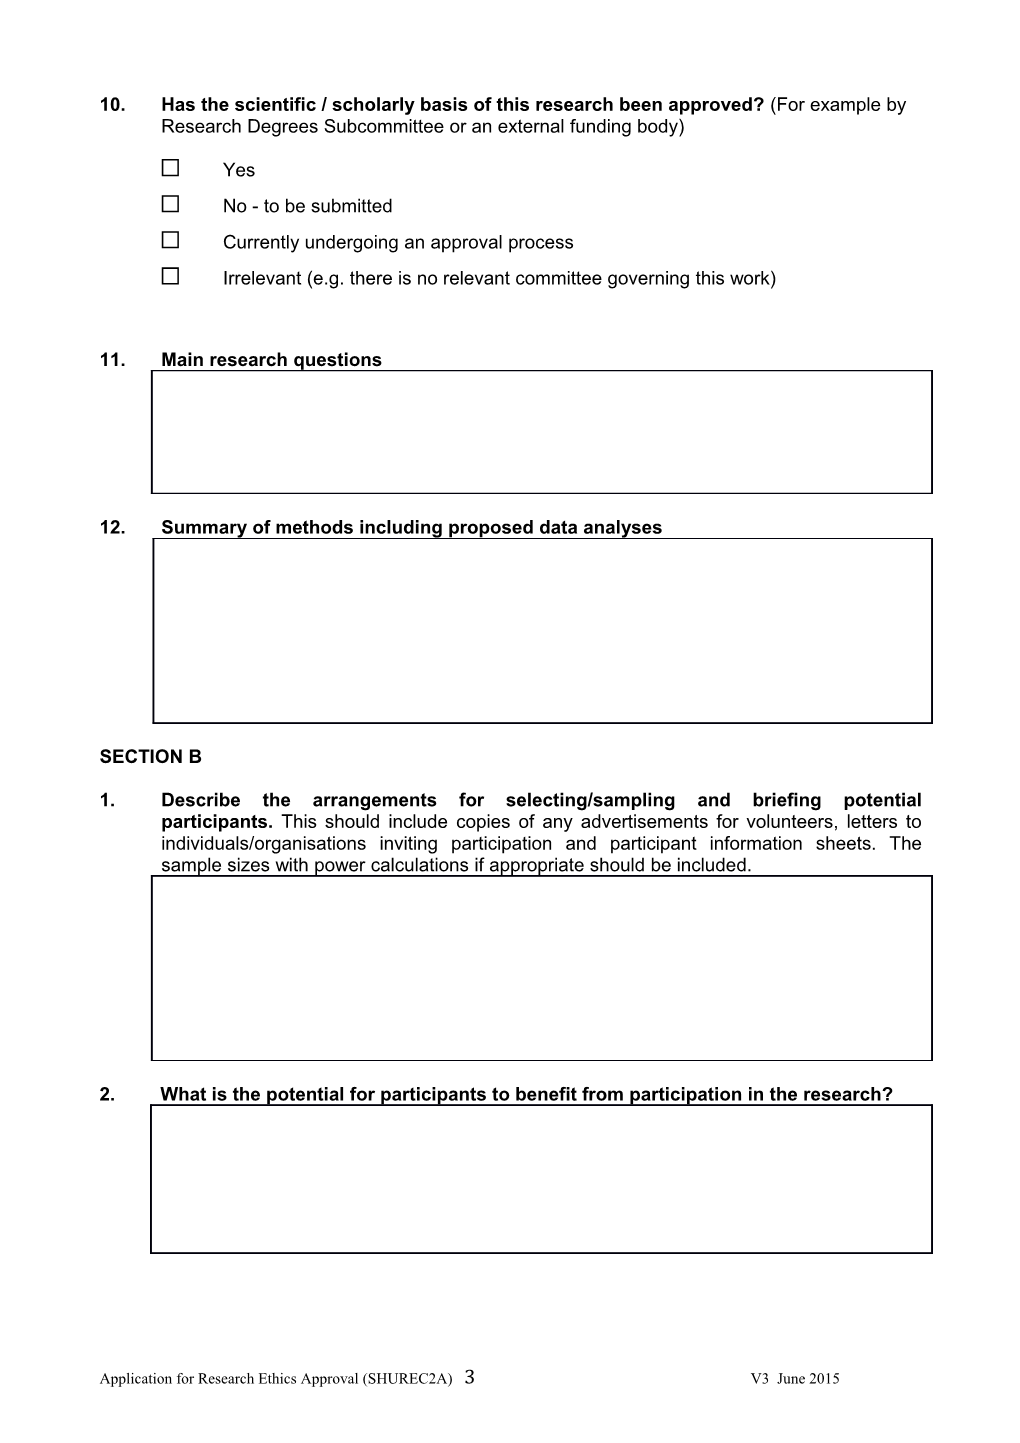 Application for Research Ethics Approval (SHUREC2A)